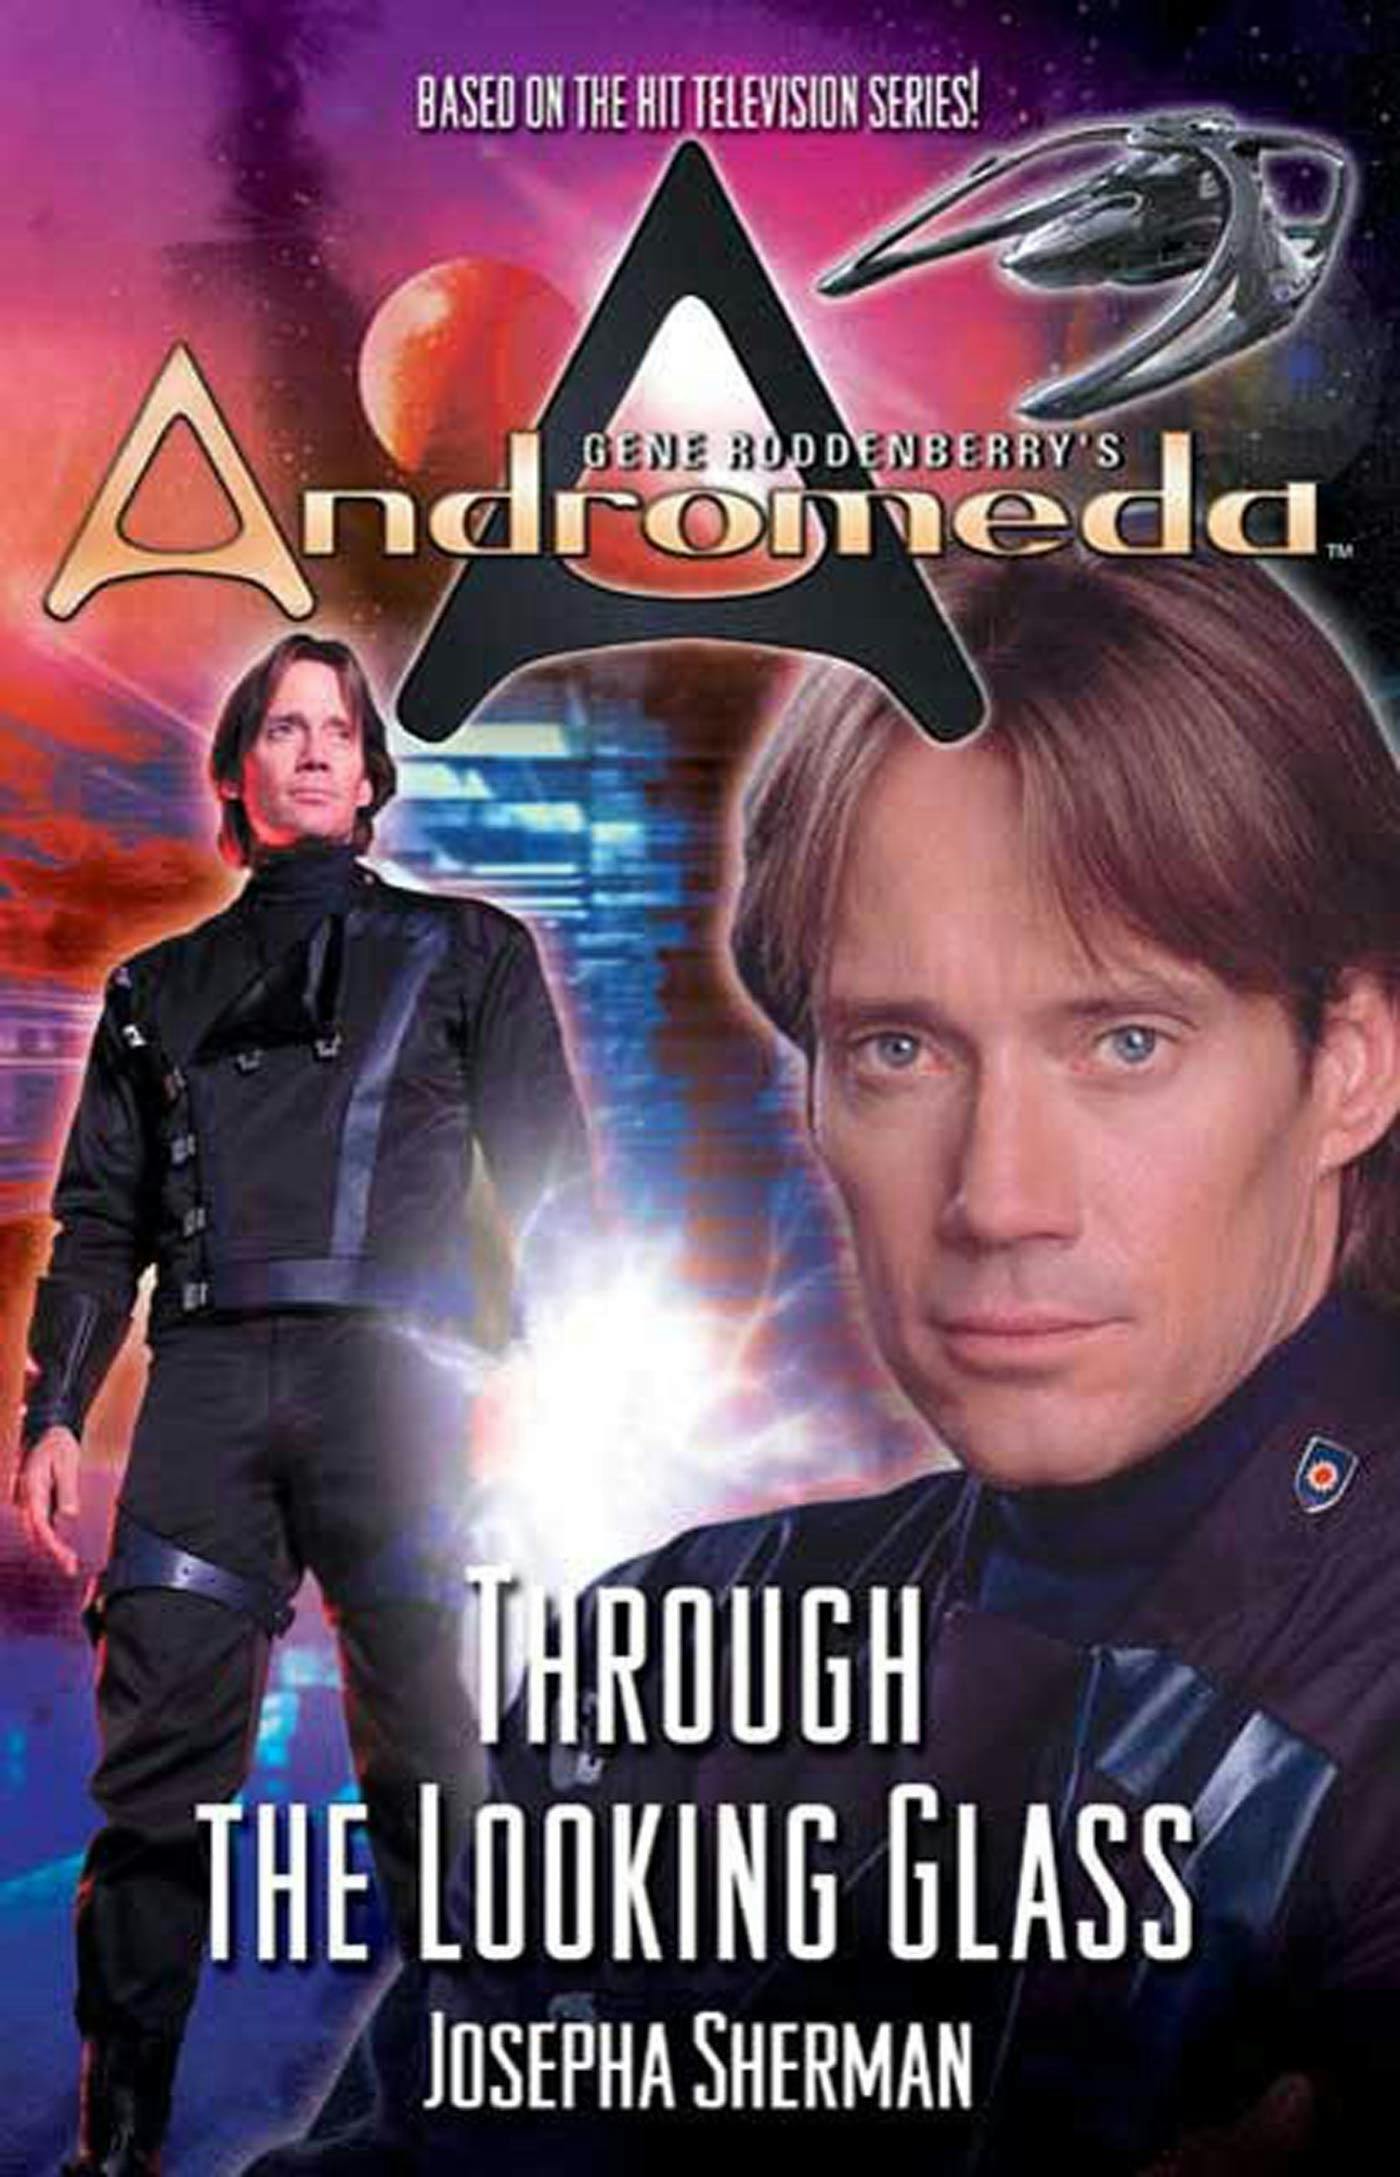 Gene Roddenberry's Andromeda: Through the Looking Glass